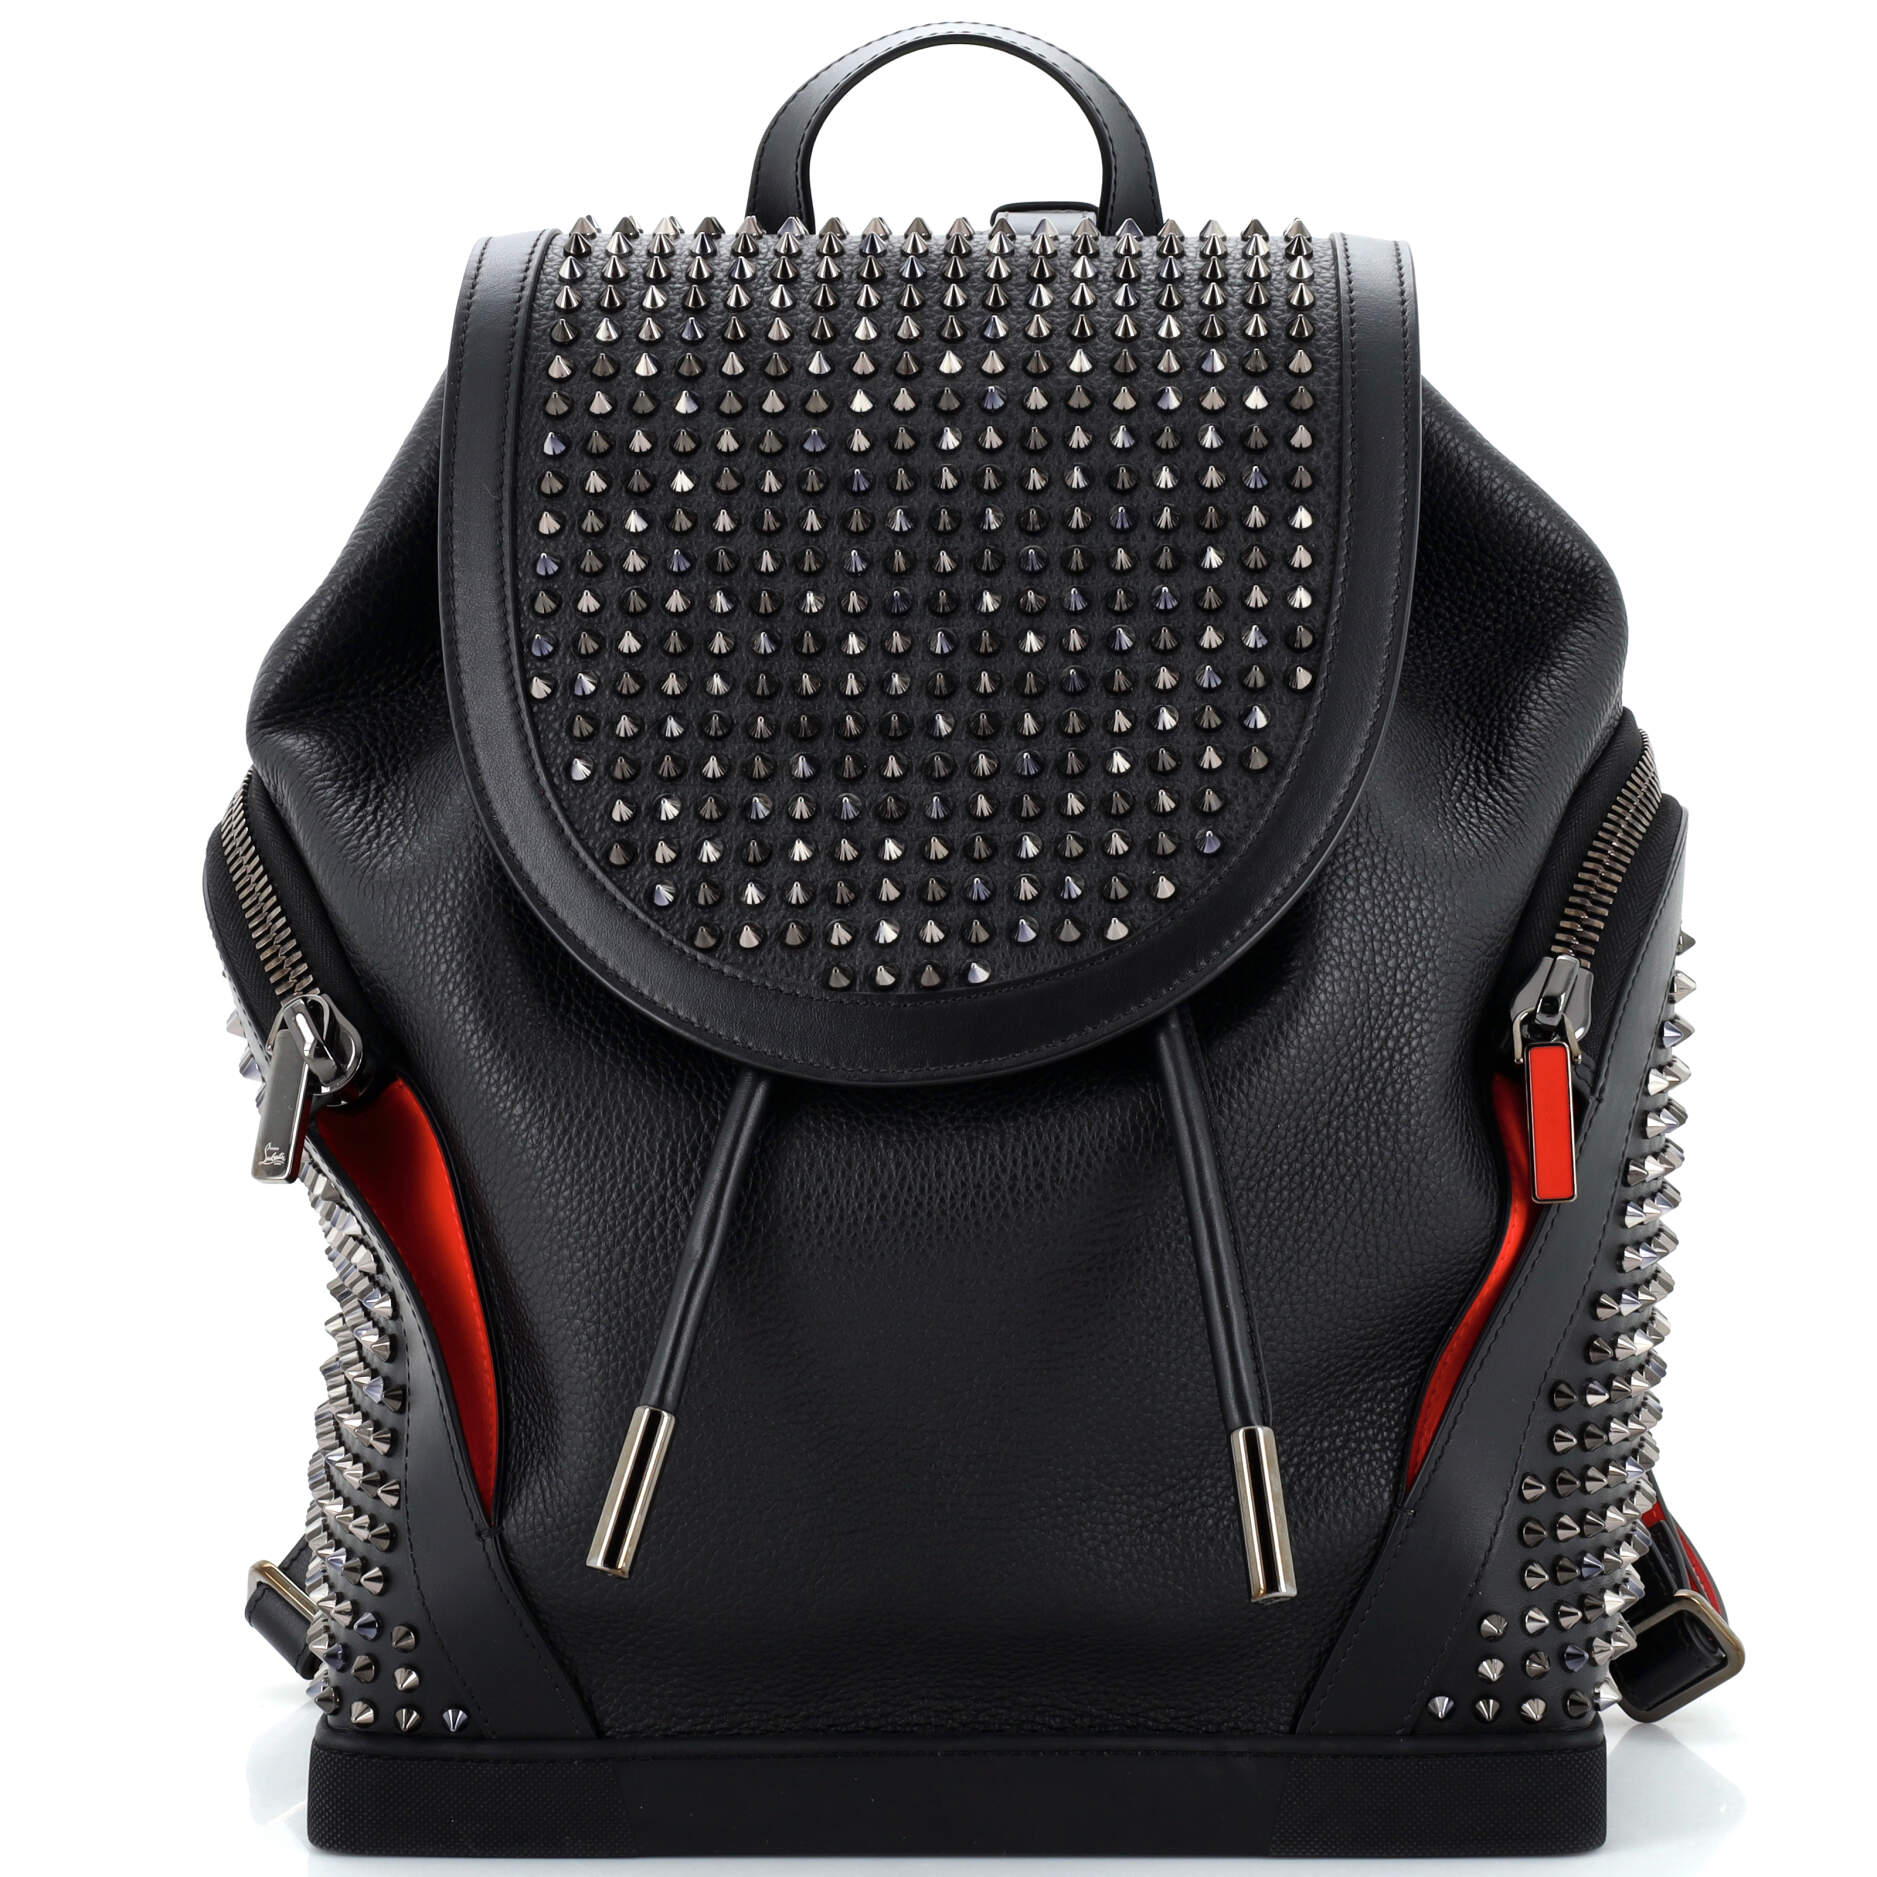 Explorafunk Backpack Spiked Leather